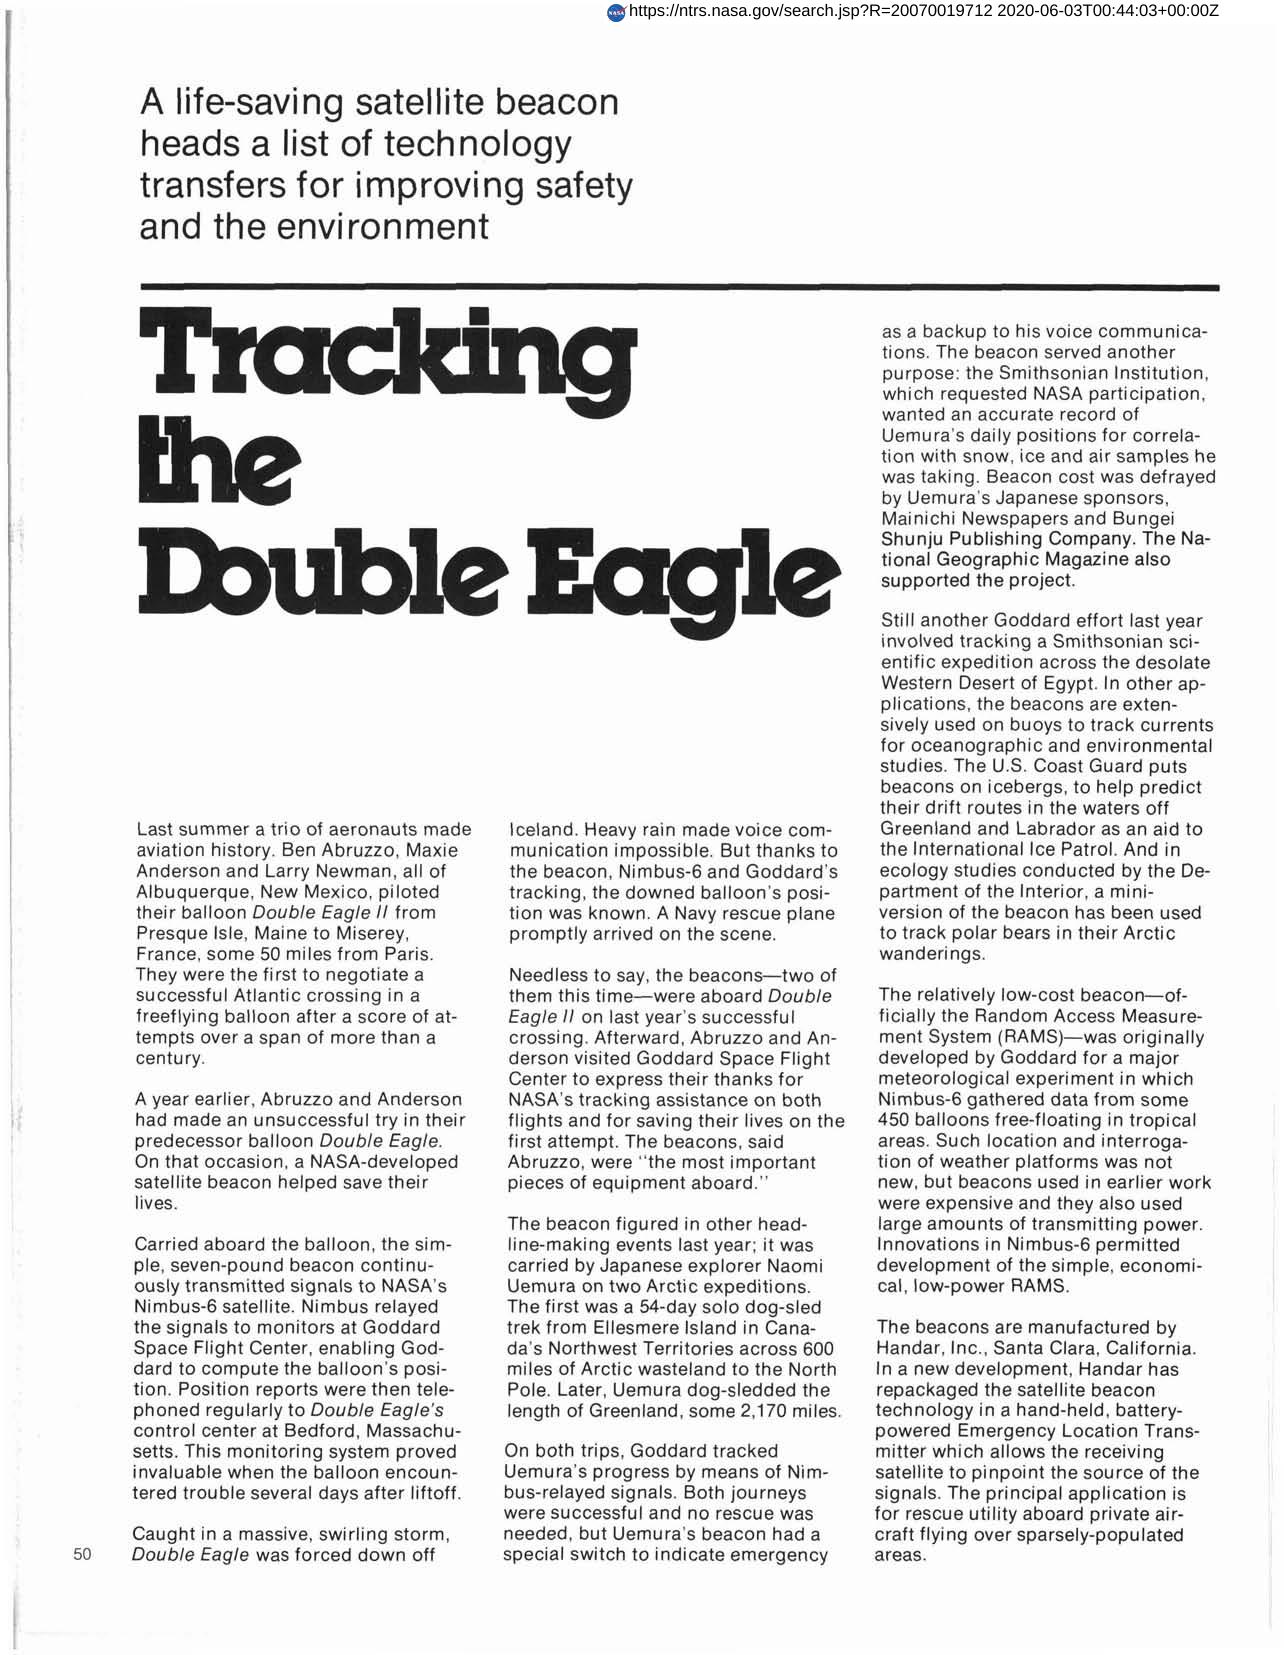 Tracking the Double Eagle